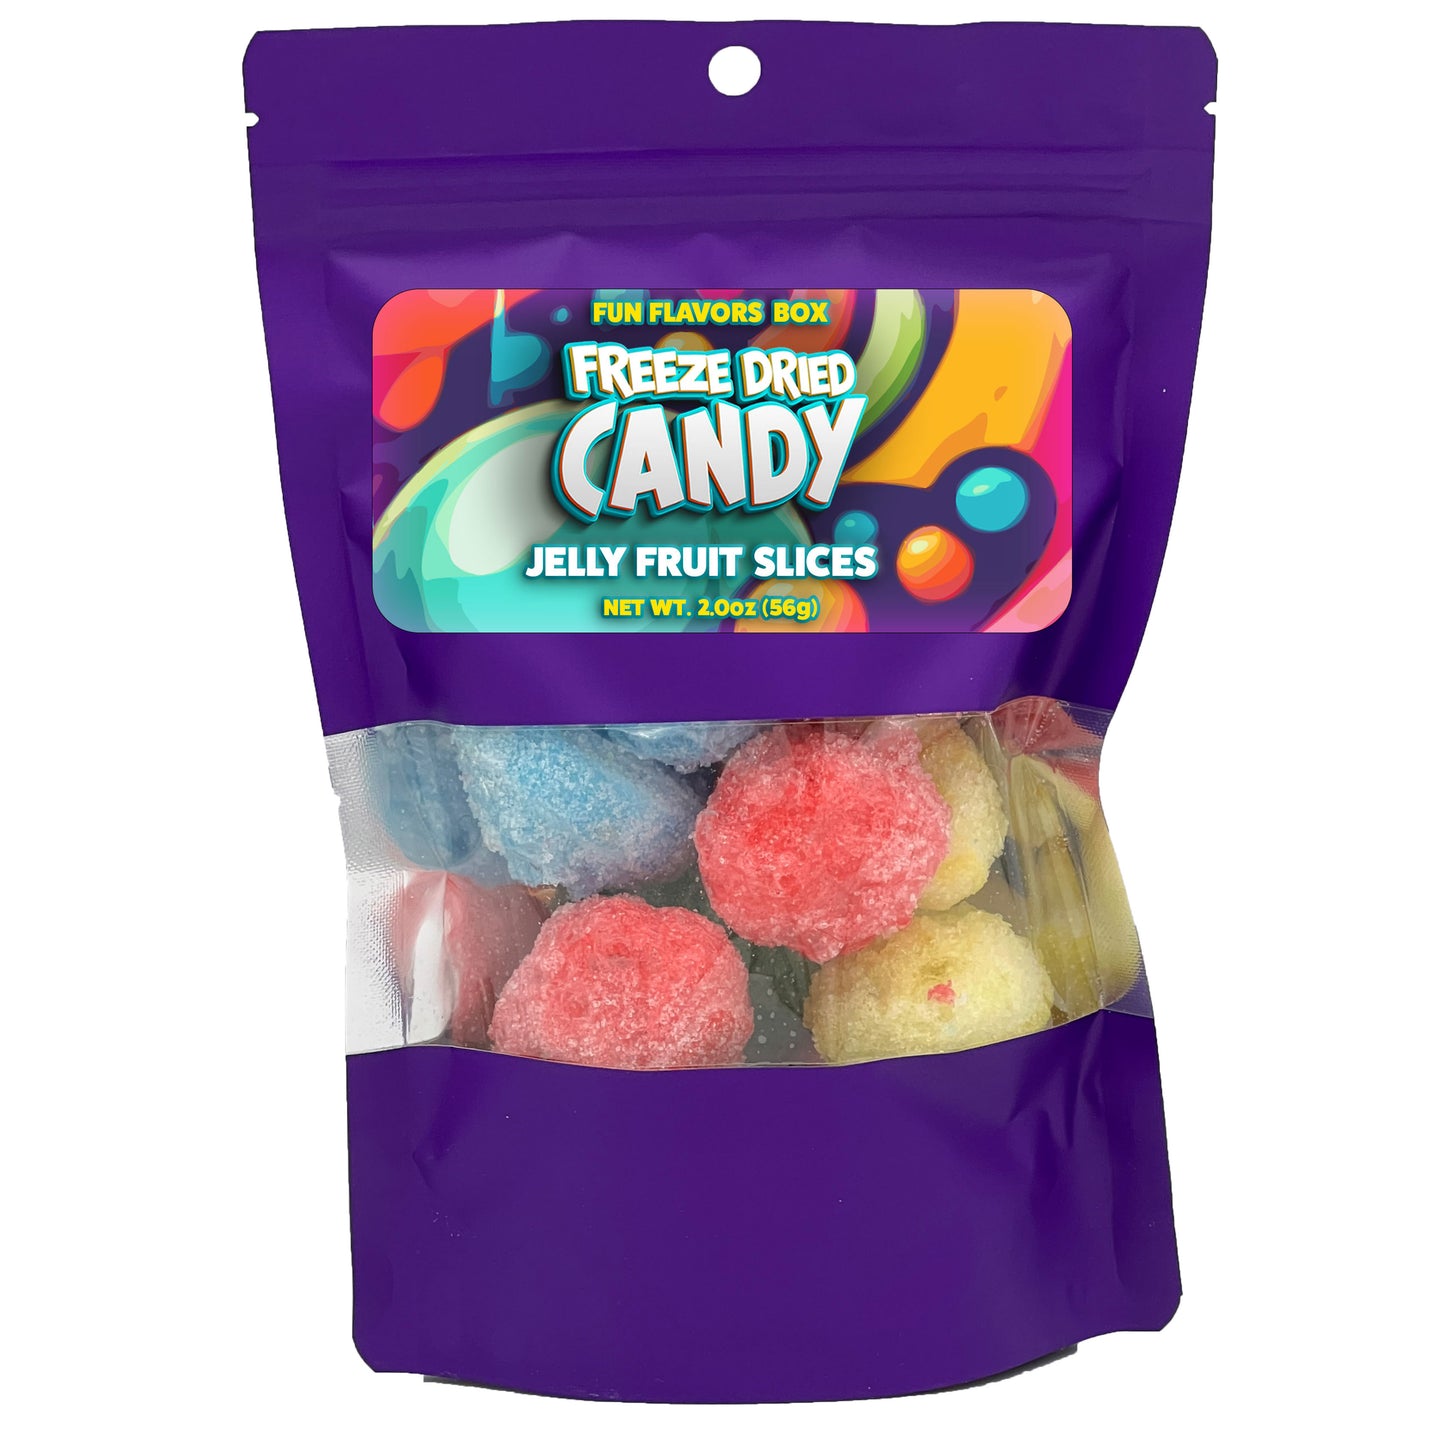 Freeze Dried Candy Jelly Fruit Slices Variety Candy Space Crunch Treats 2oz